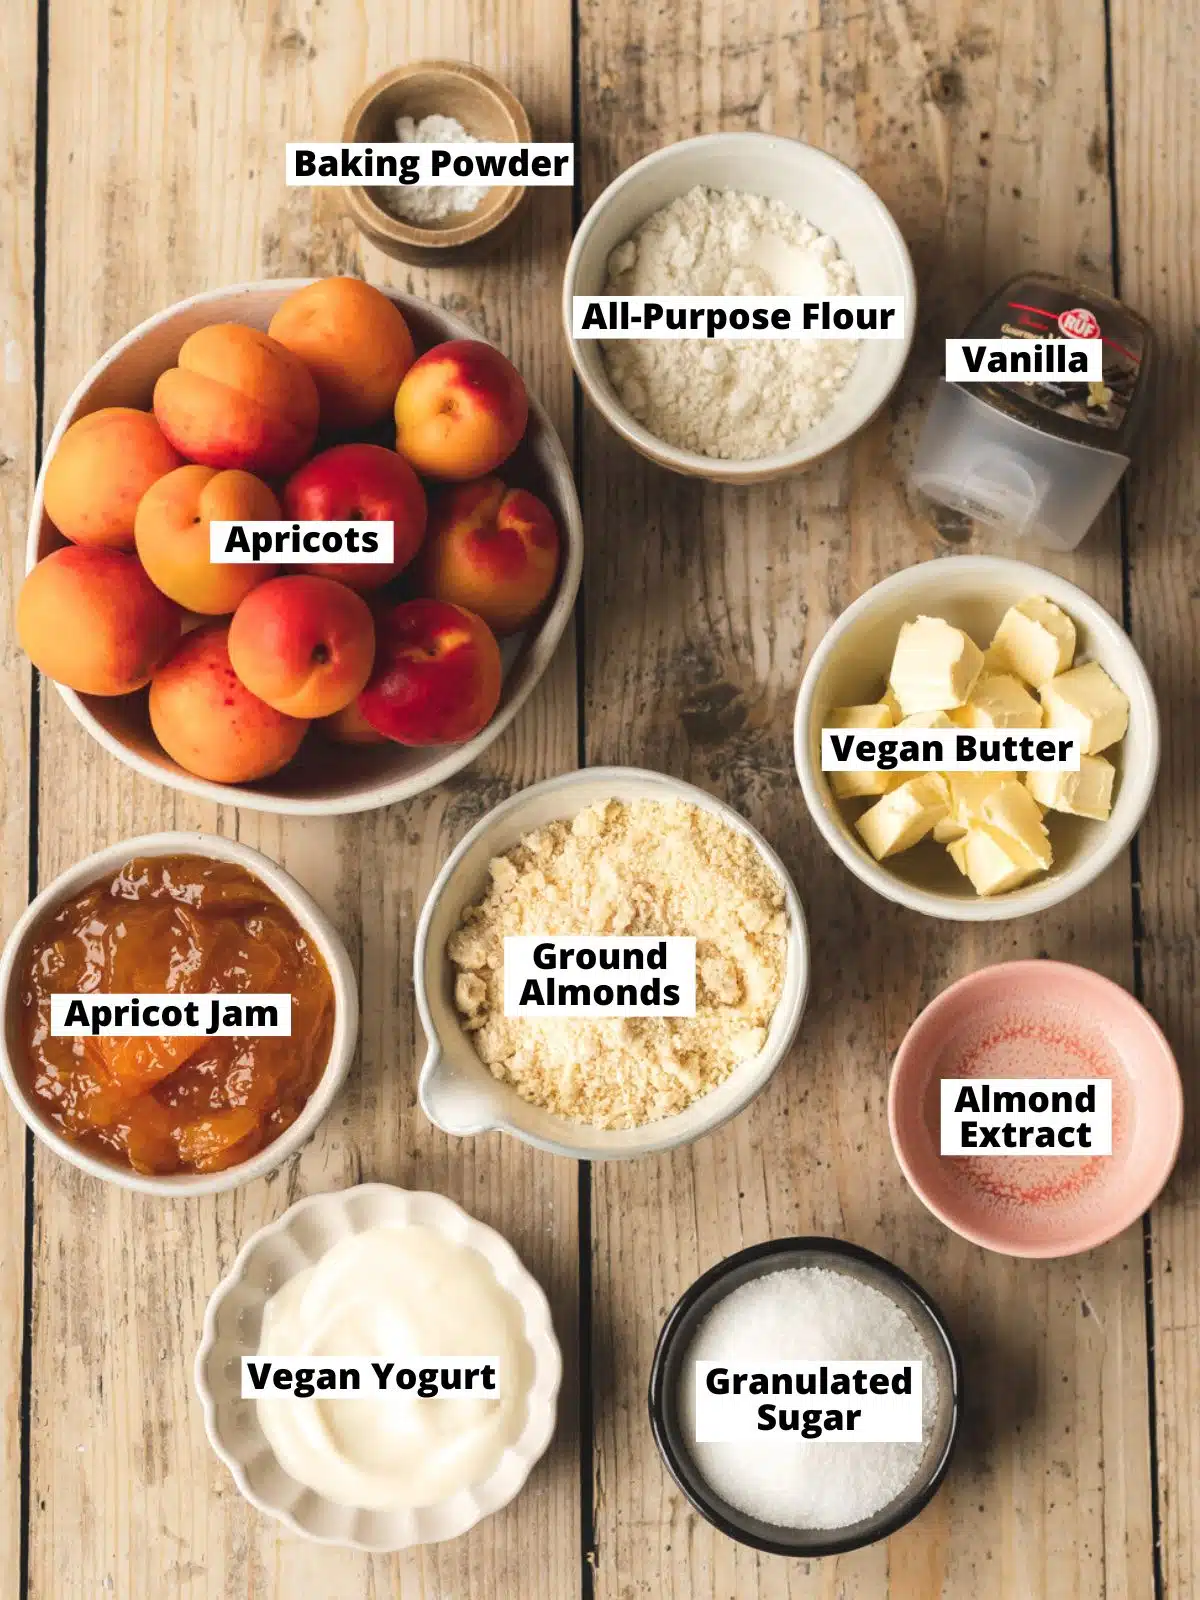 Ingredients needed to make a plant-based almond apricot tart measured out into bowls on a wooden table.